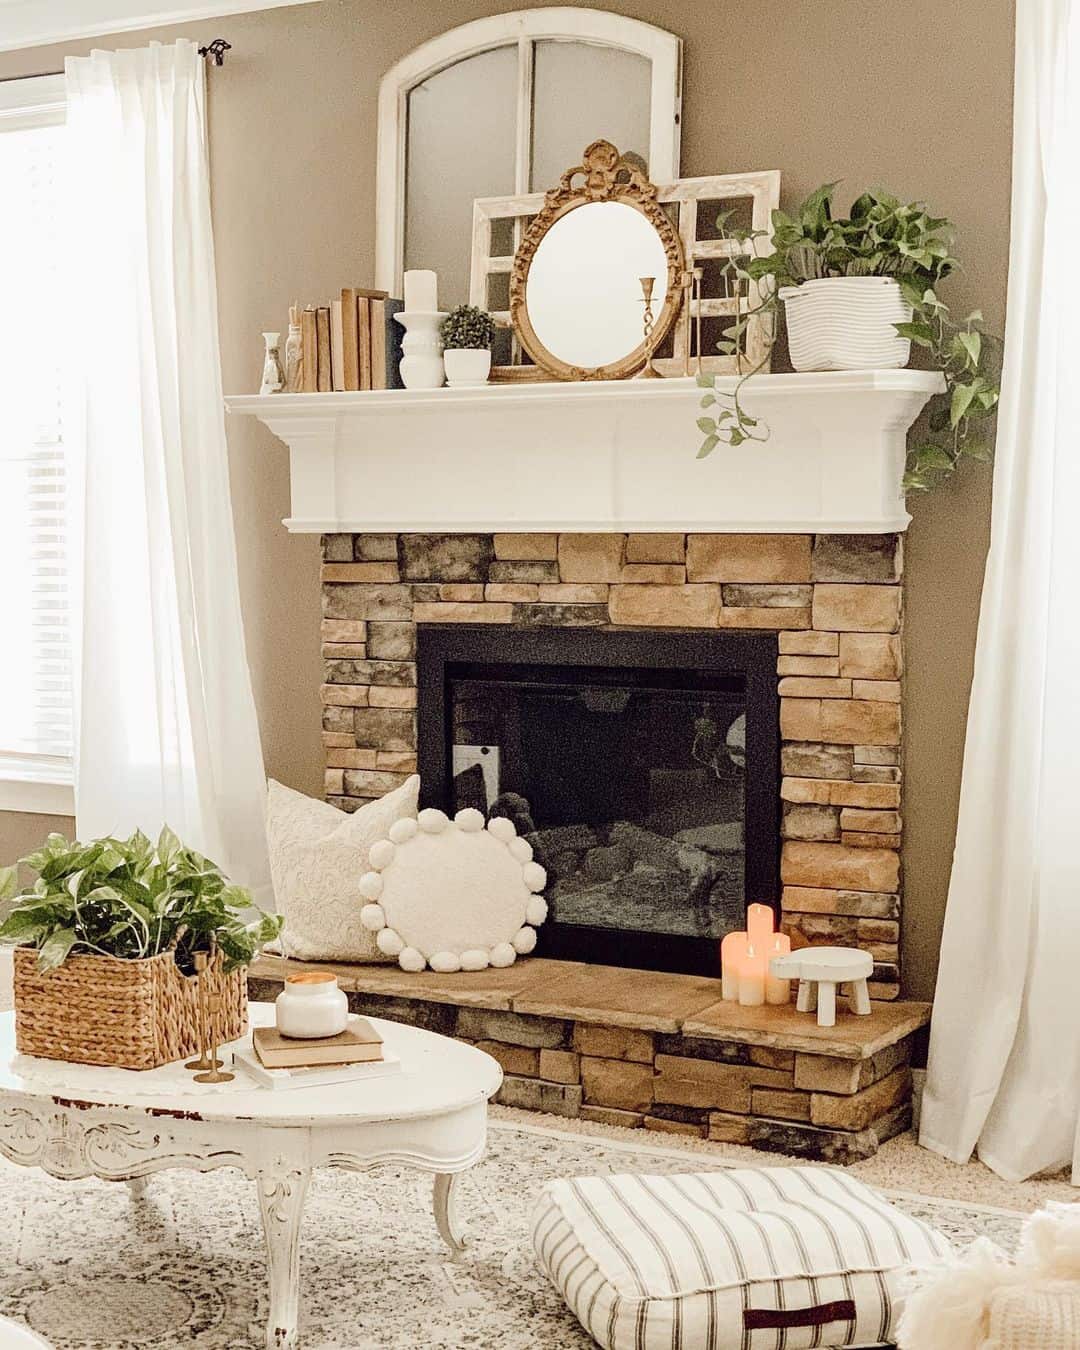 Mirror above fireplace ideas; This captivating photo displays a charming display of vintage frames and a mirror. The vintage window frames bring a touch of nostalgia and character to the space, showcasing different shapes, and sizes. The mirror adds a touch of vintage glamour and reflection, enhancing the visual appeal of the vintage frames and creating a captivating focal point in the room.